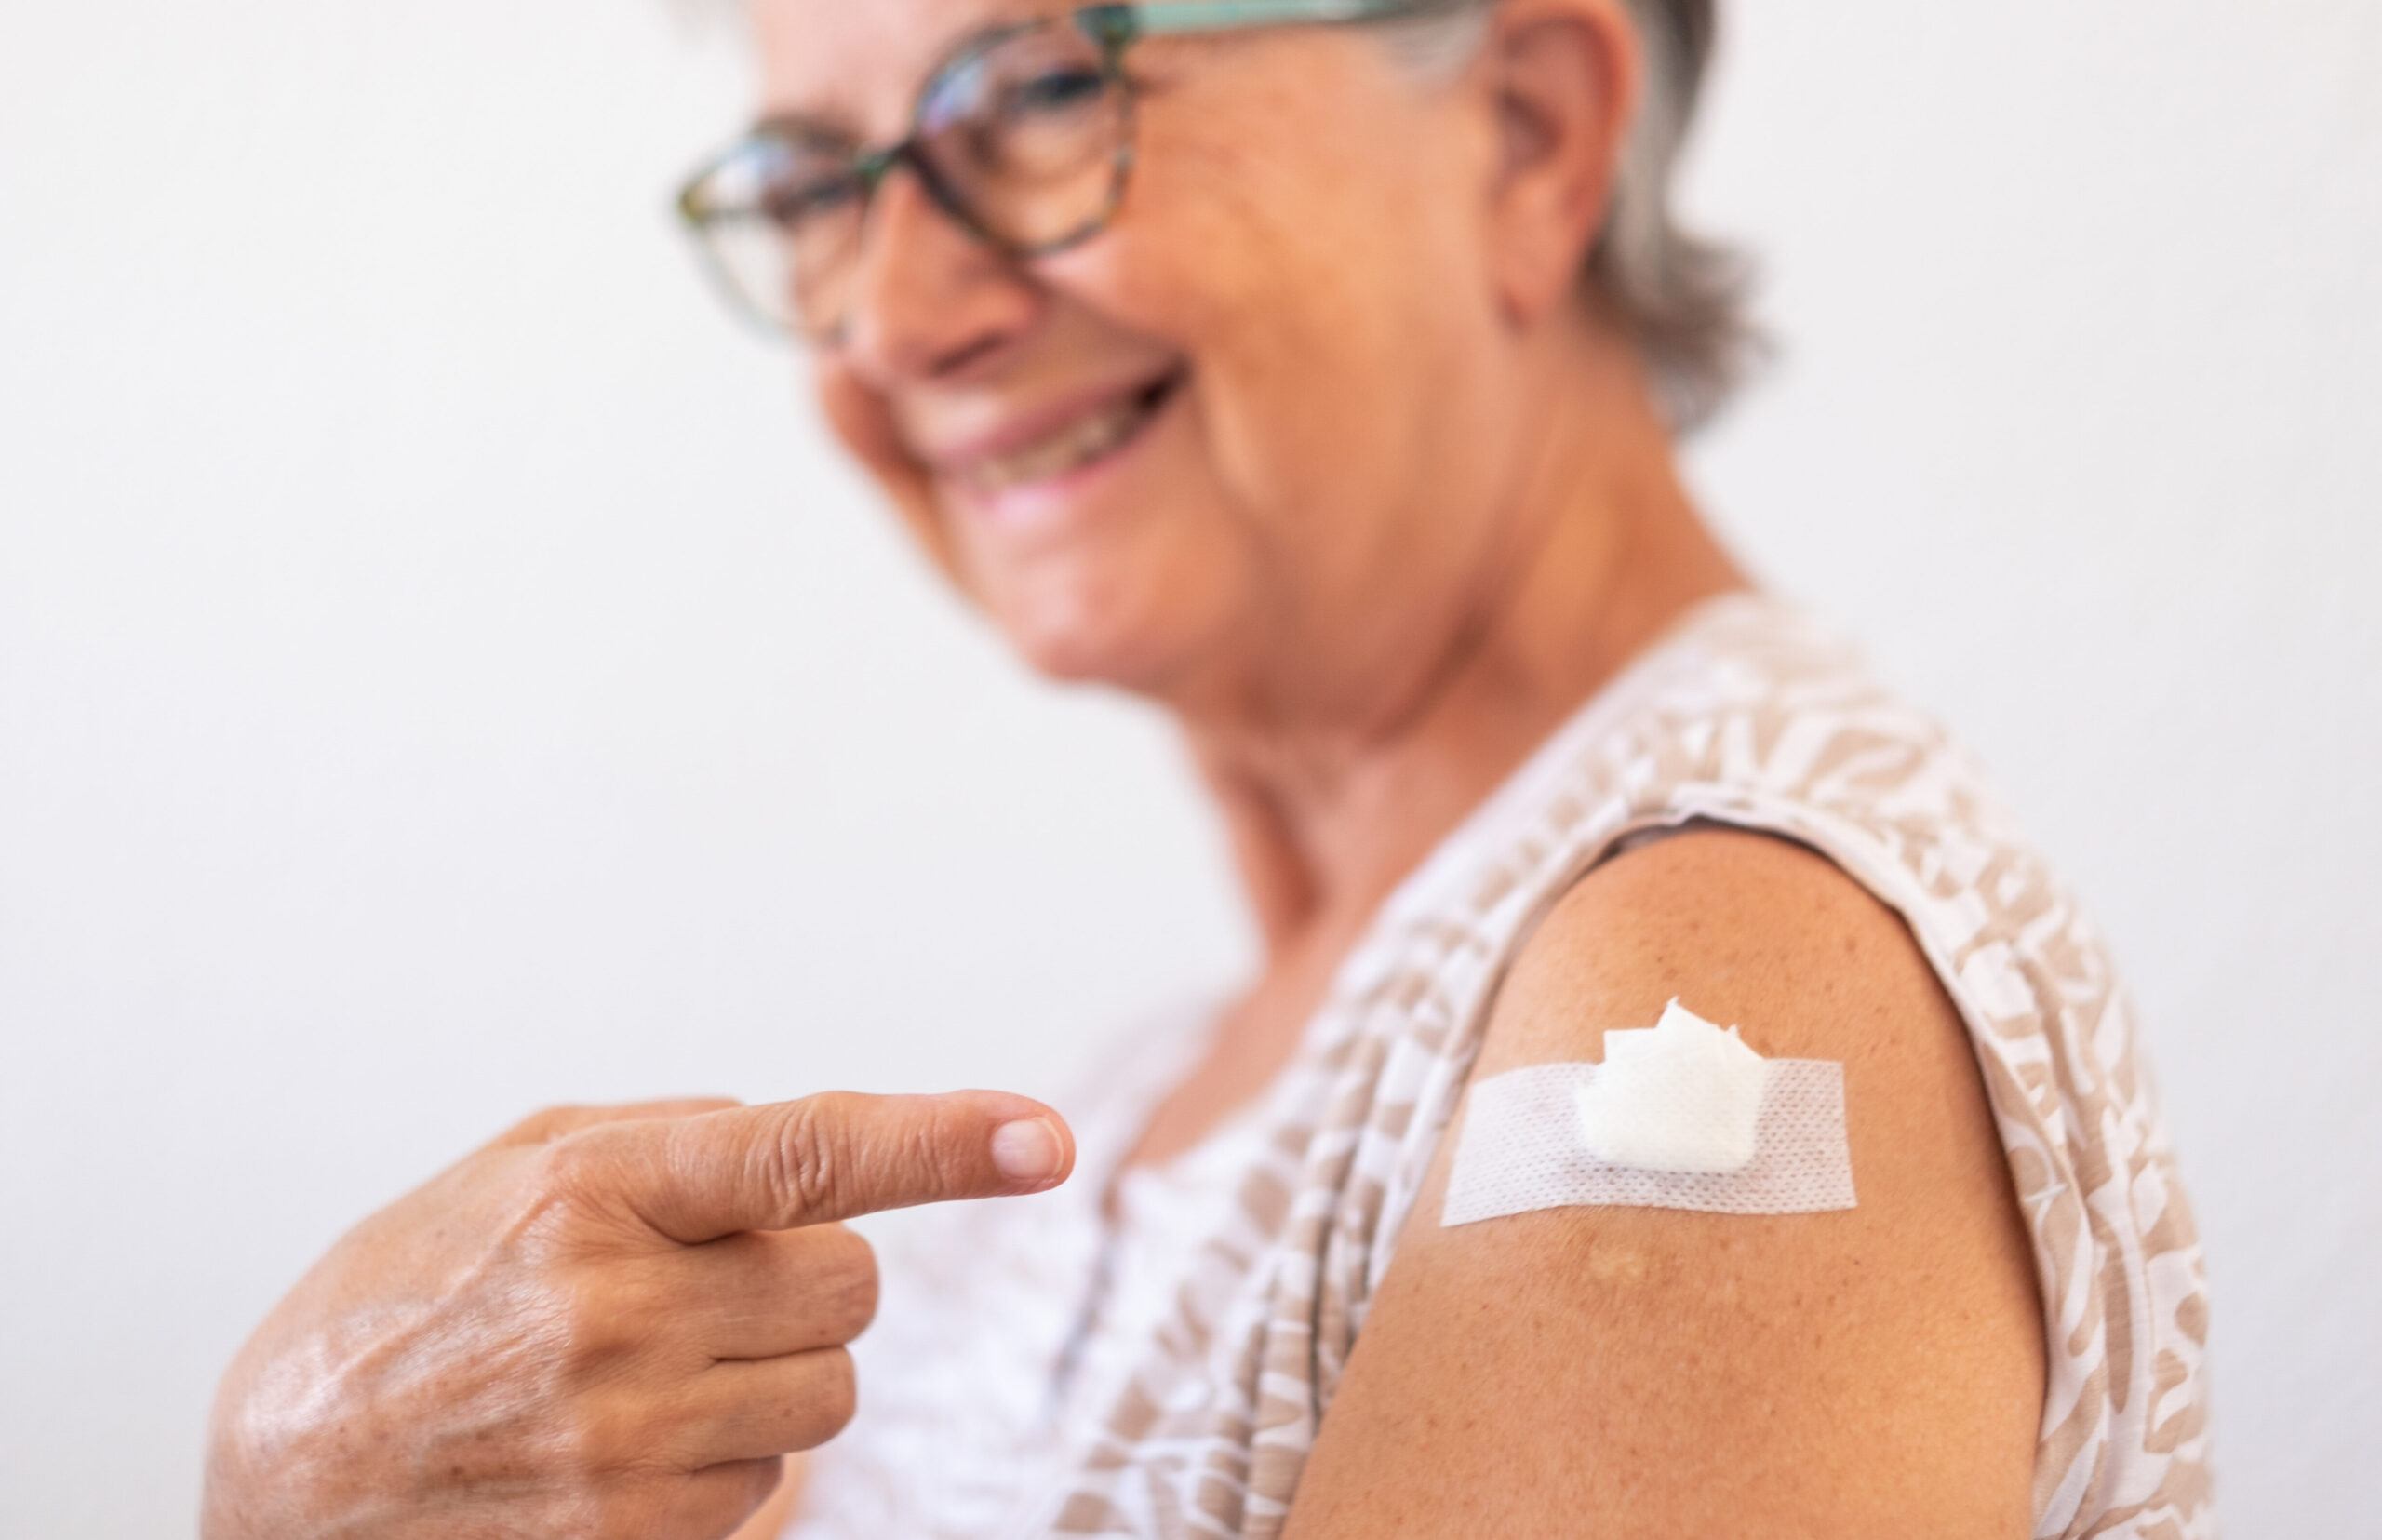 Vaccination Advice from LeadingAge Members